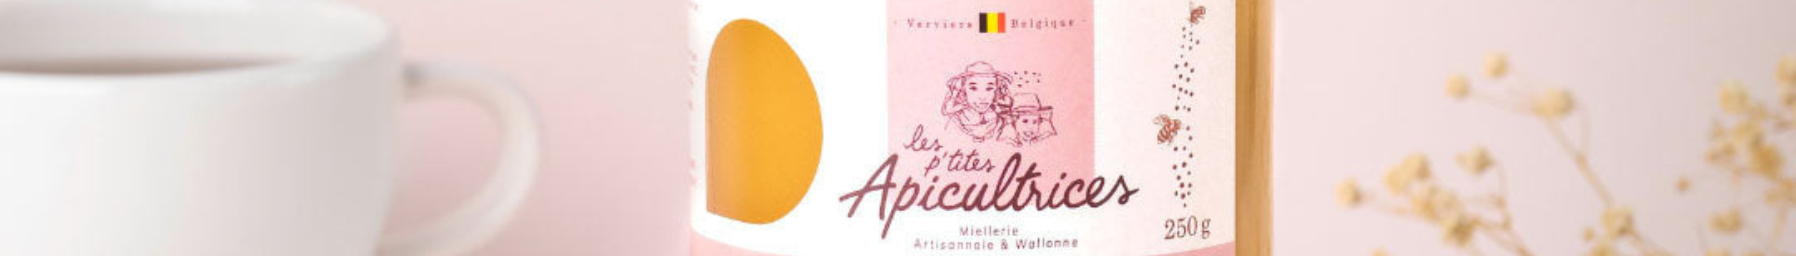 Les p'tites Apicultrices - New supplier on Syncee Marketplace
